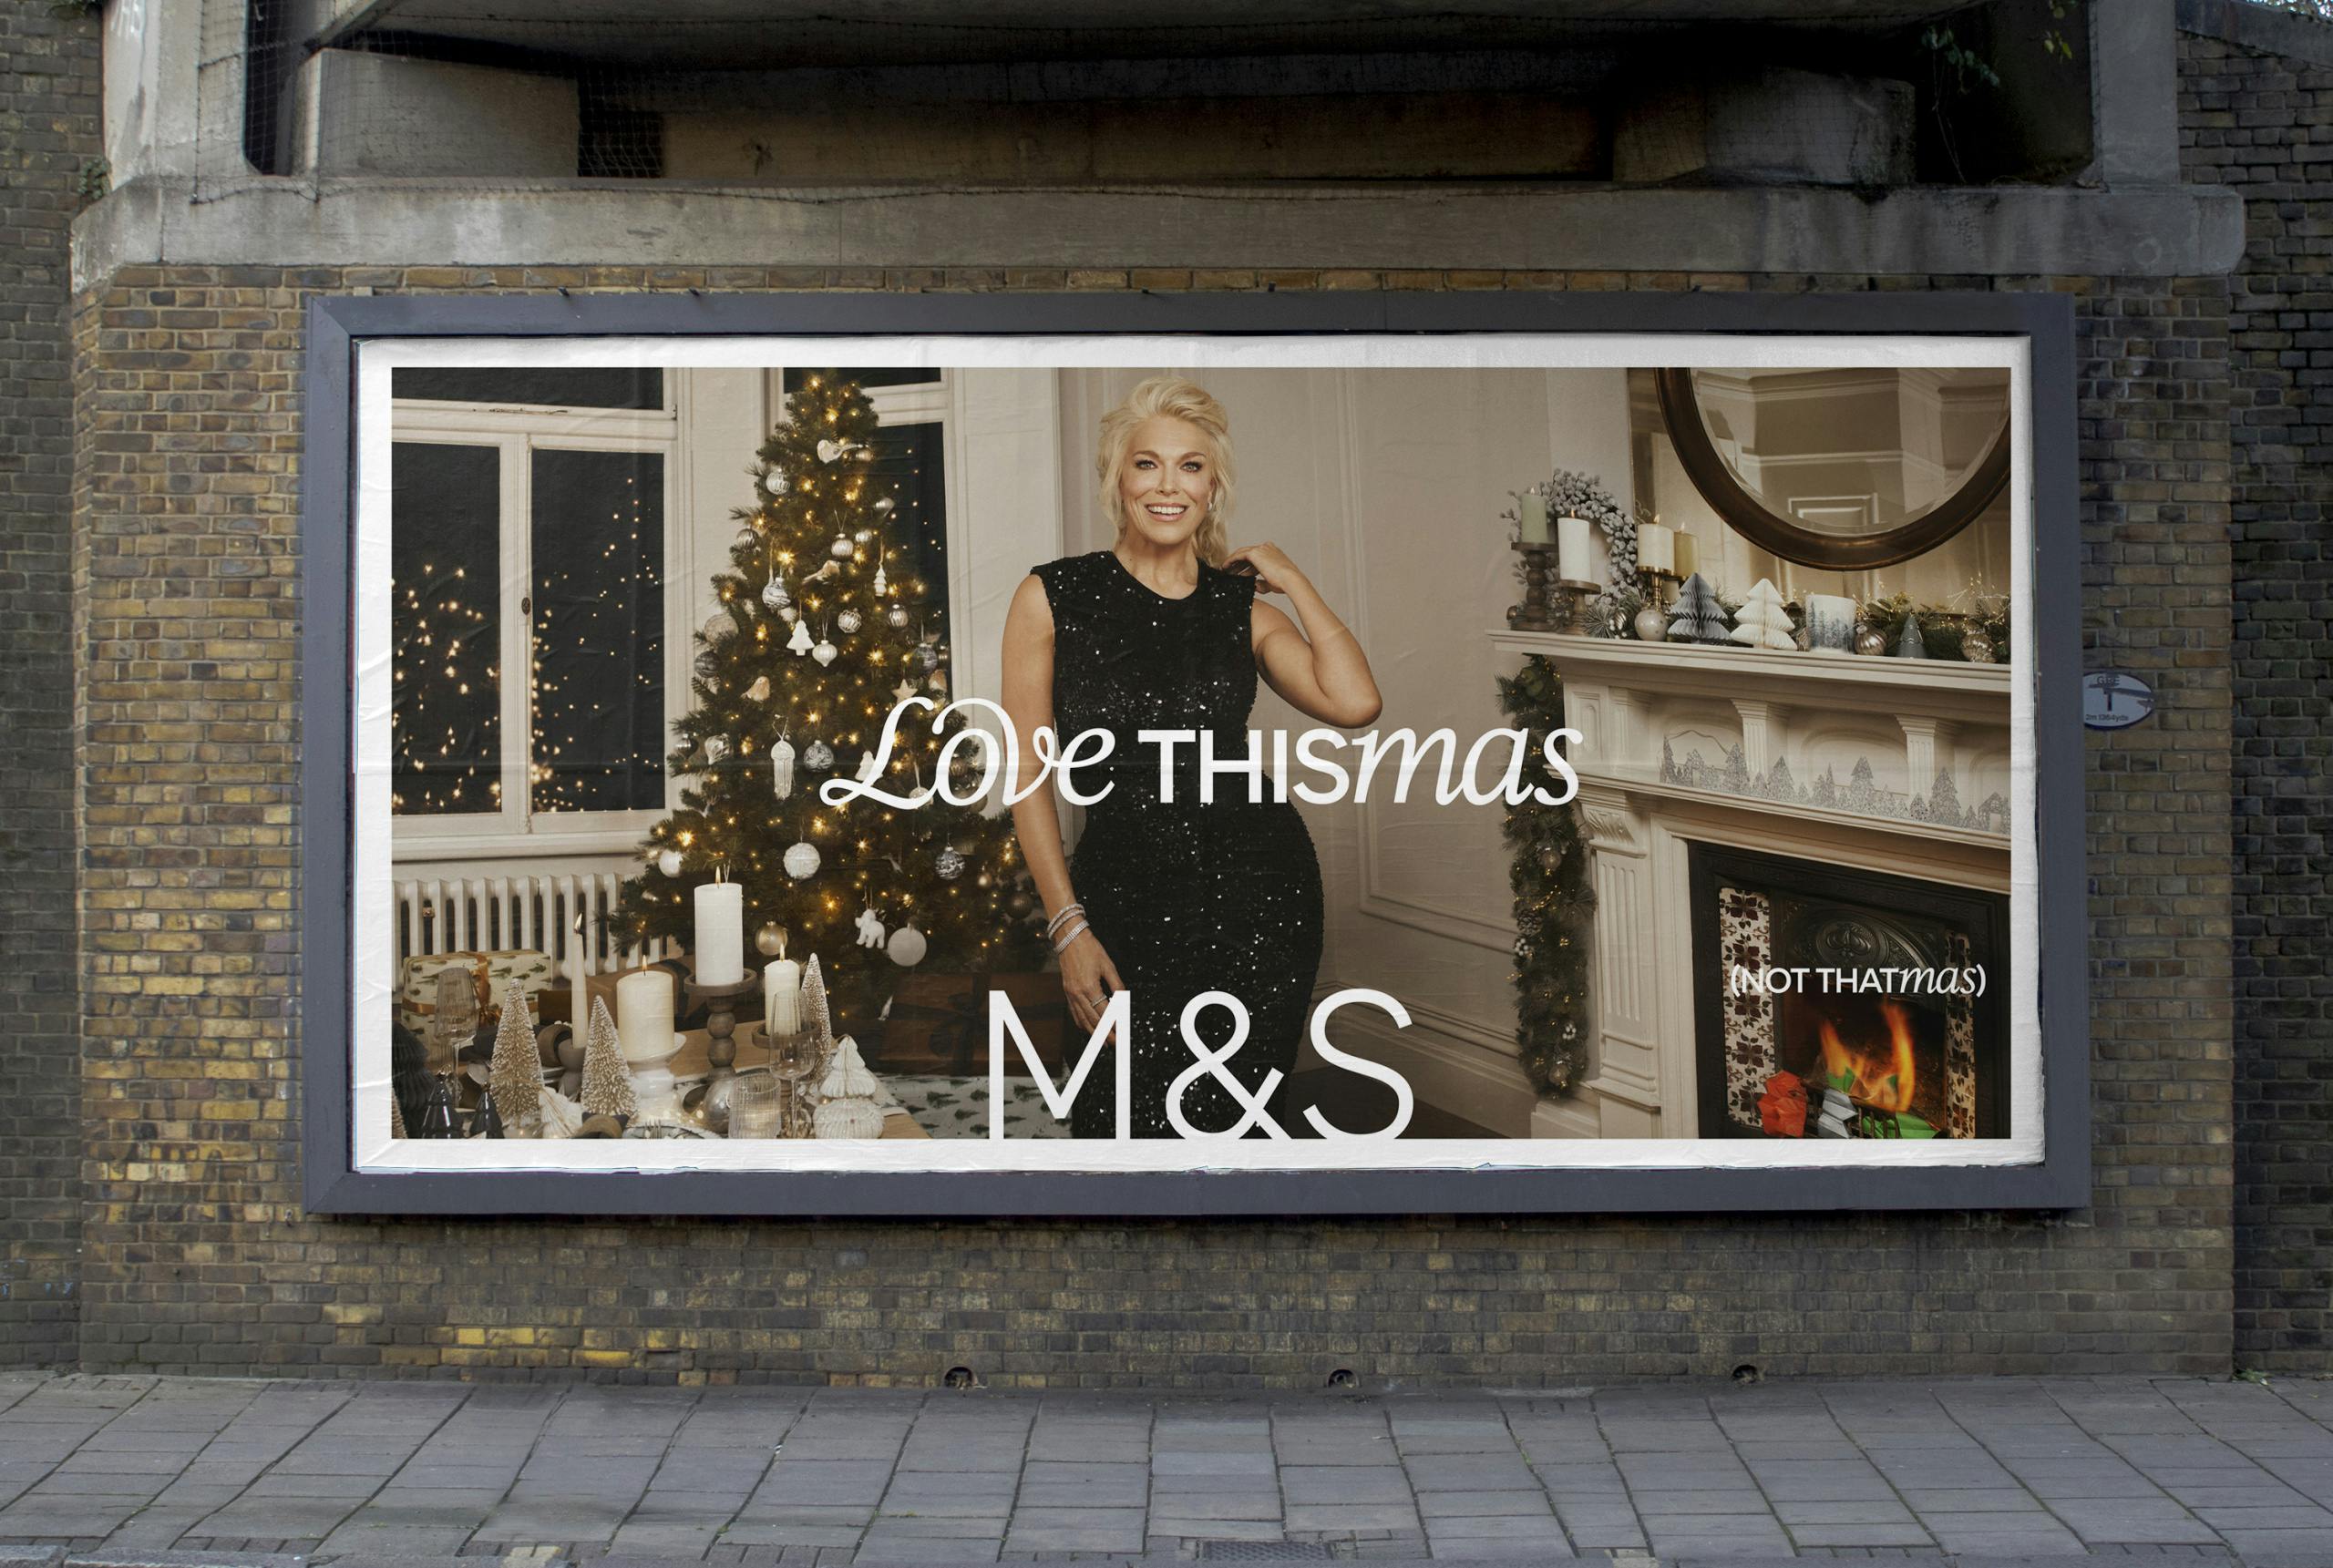 M&S tells customers to take it easy and 'Love Thismas, not Thatmas